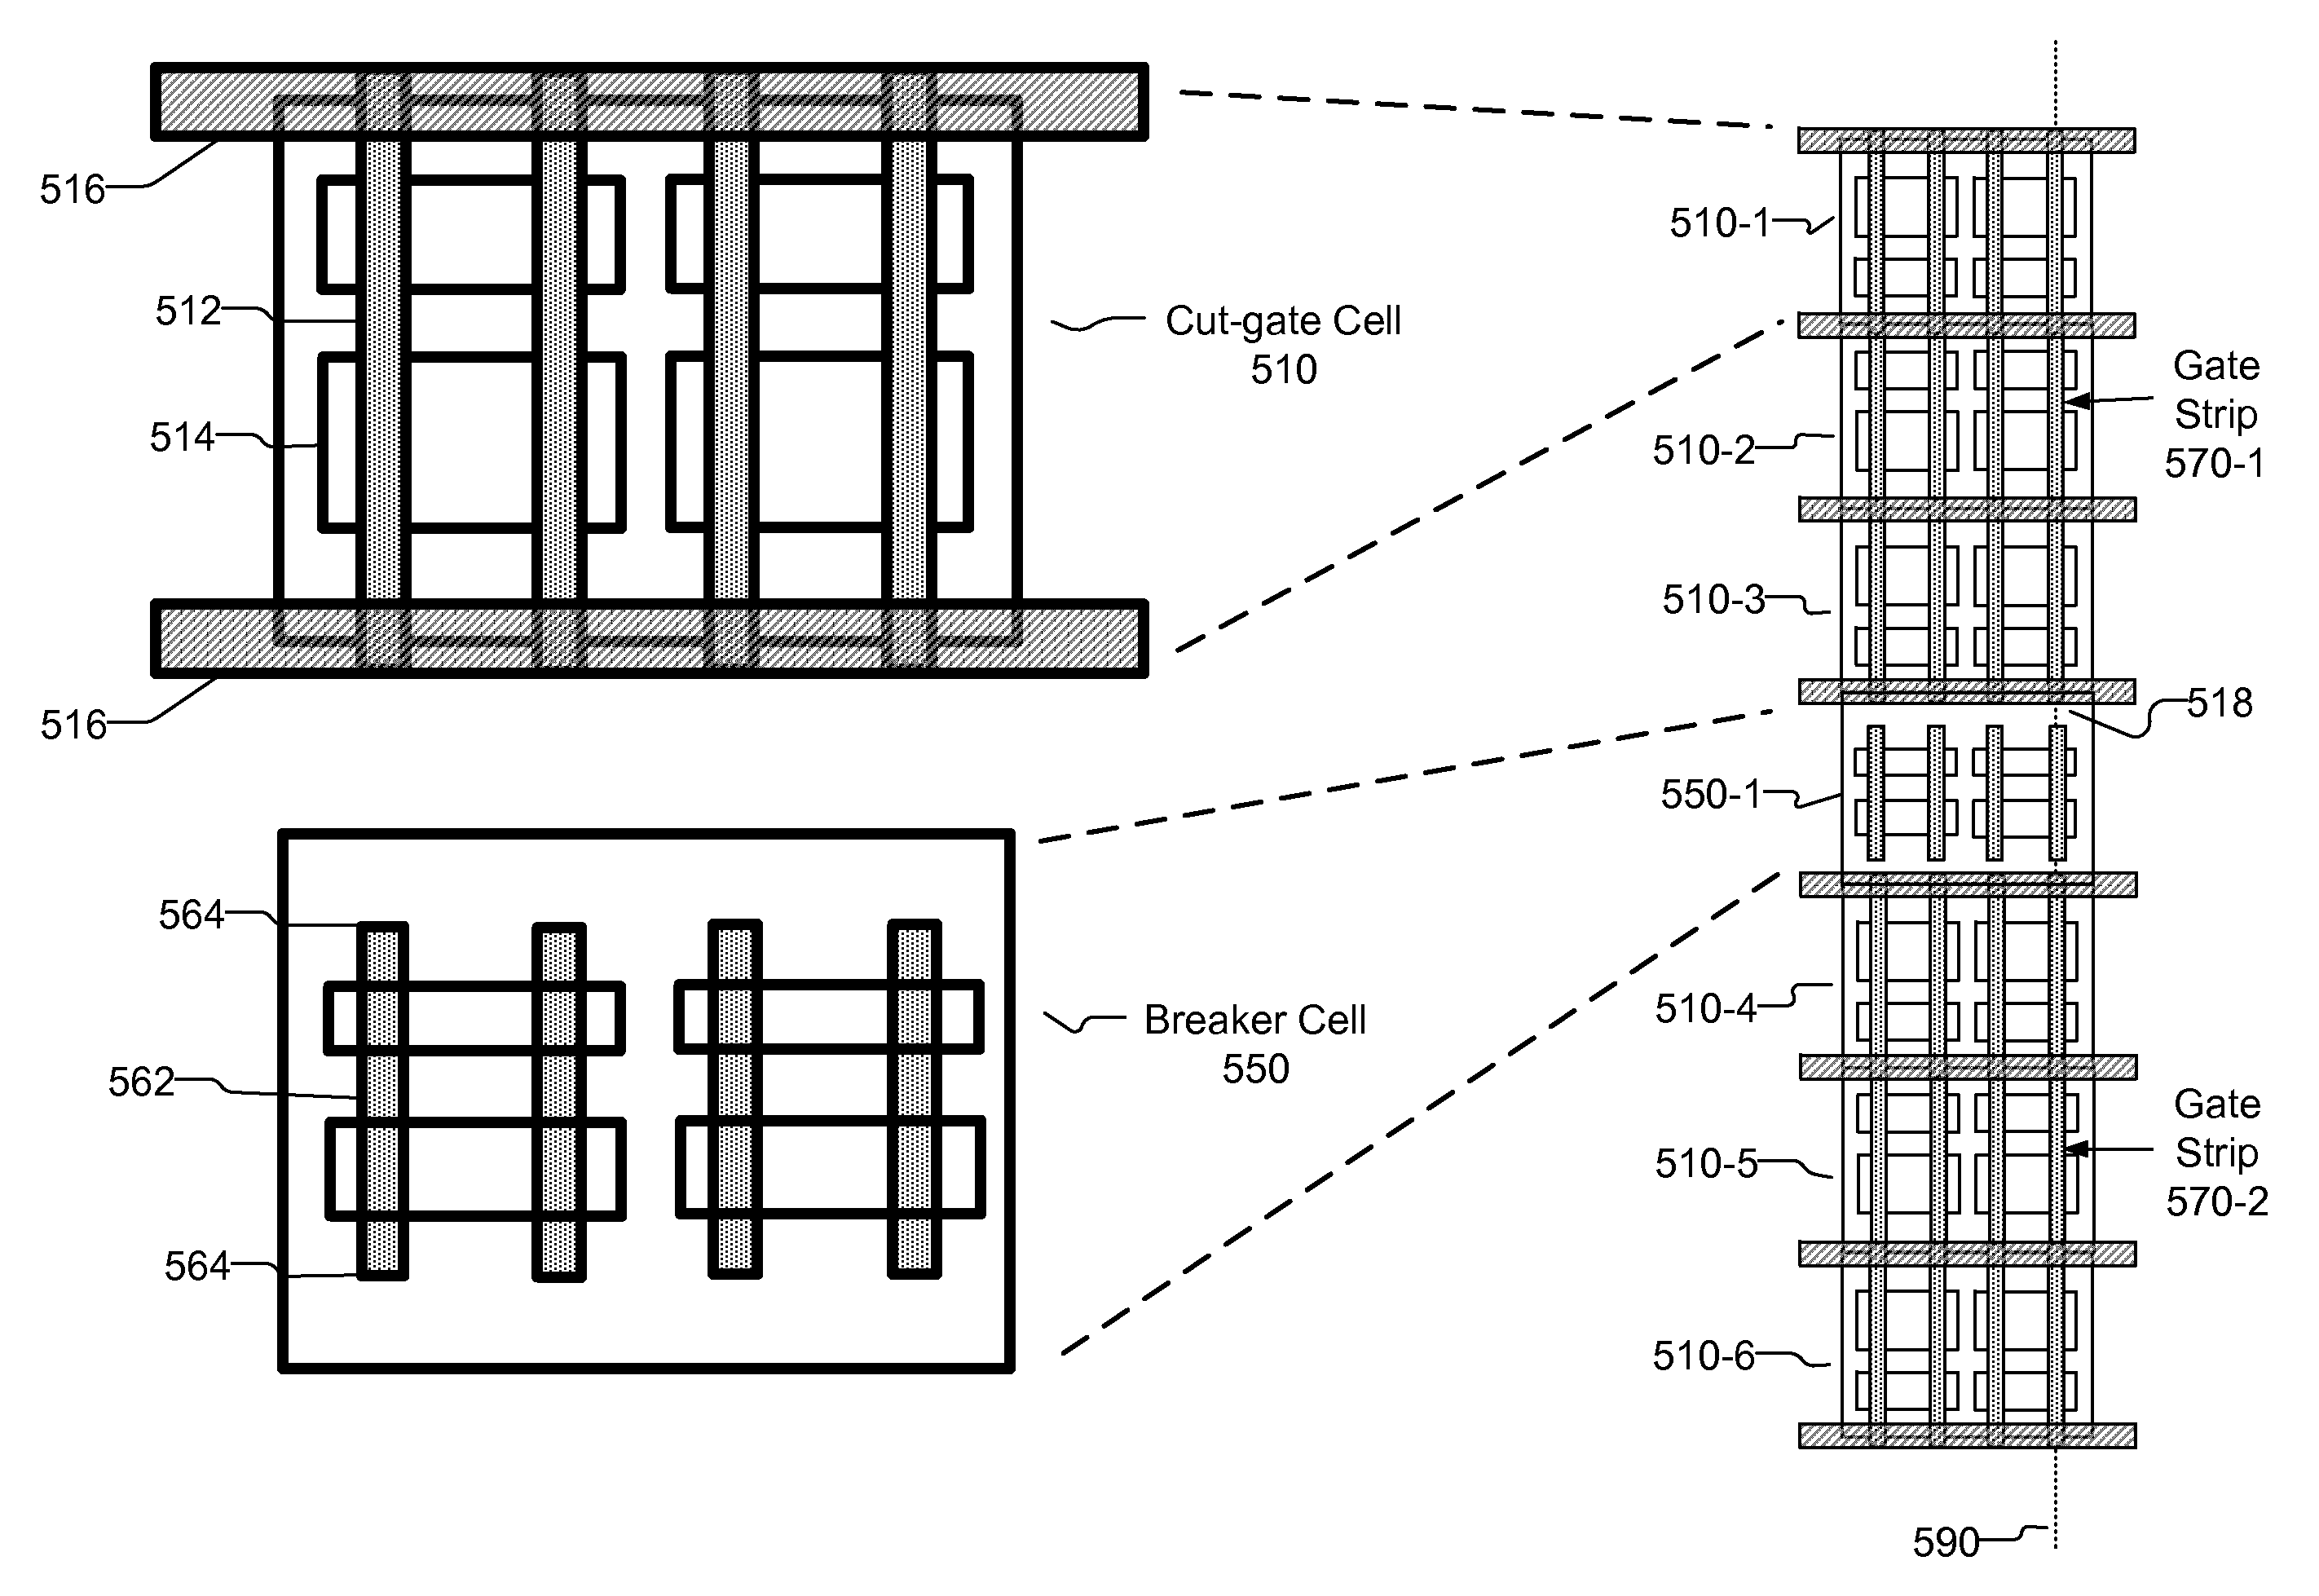 Cell architecture for increasing transistor size